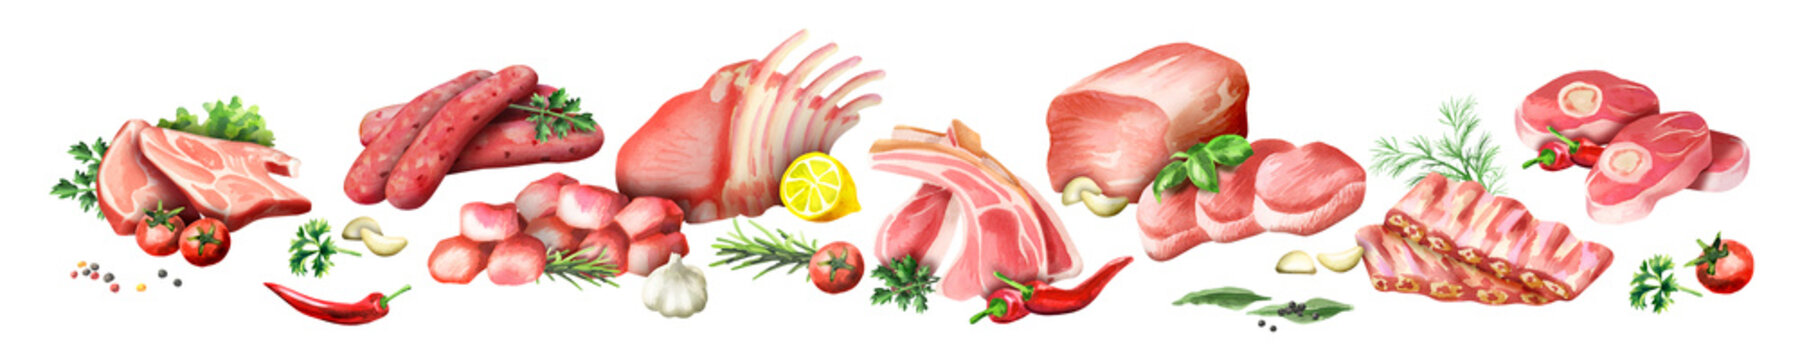 Panoramic image of raw meat on a white background. Watercolor